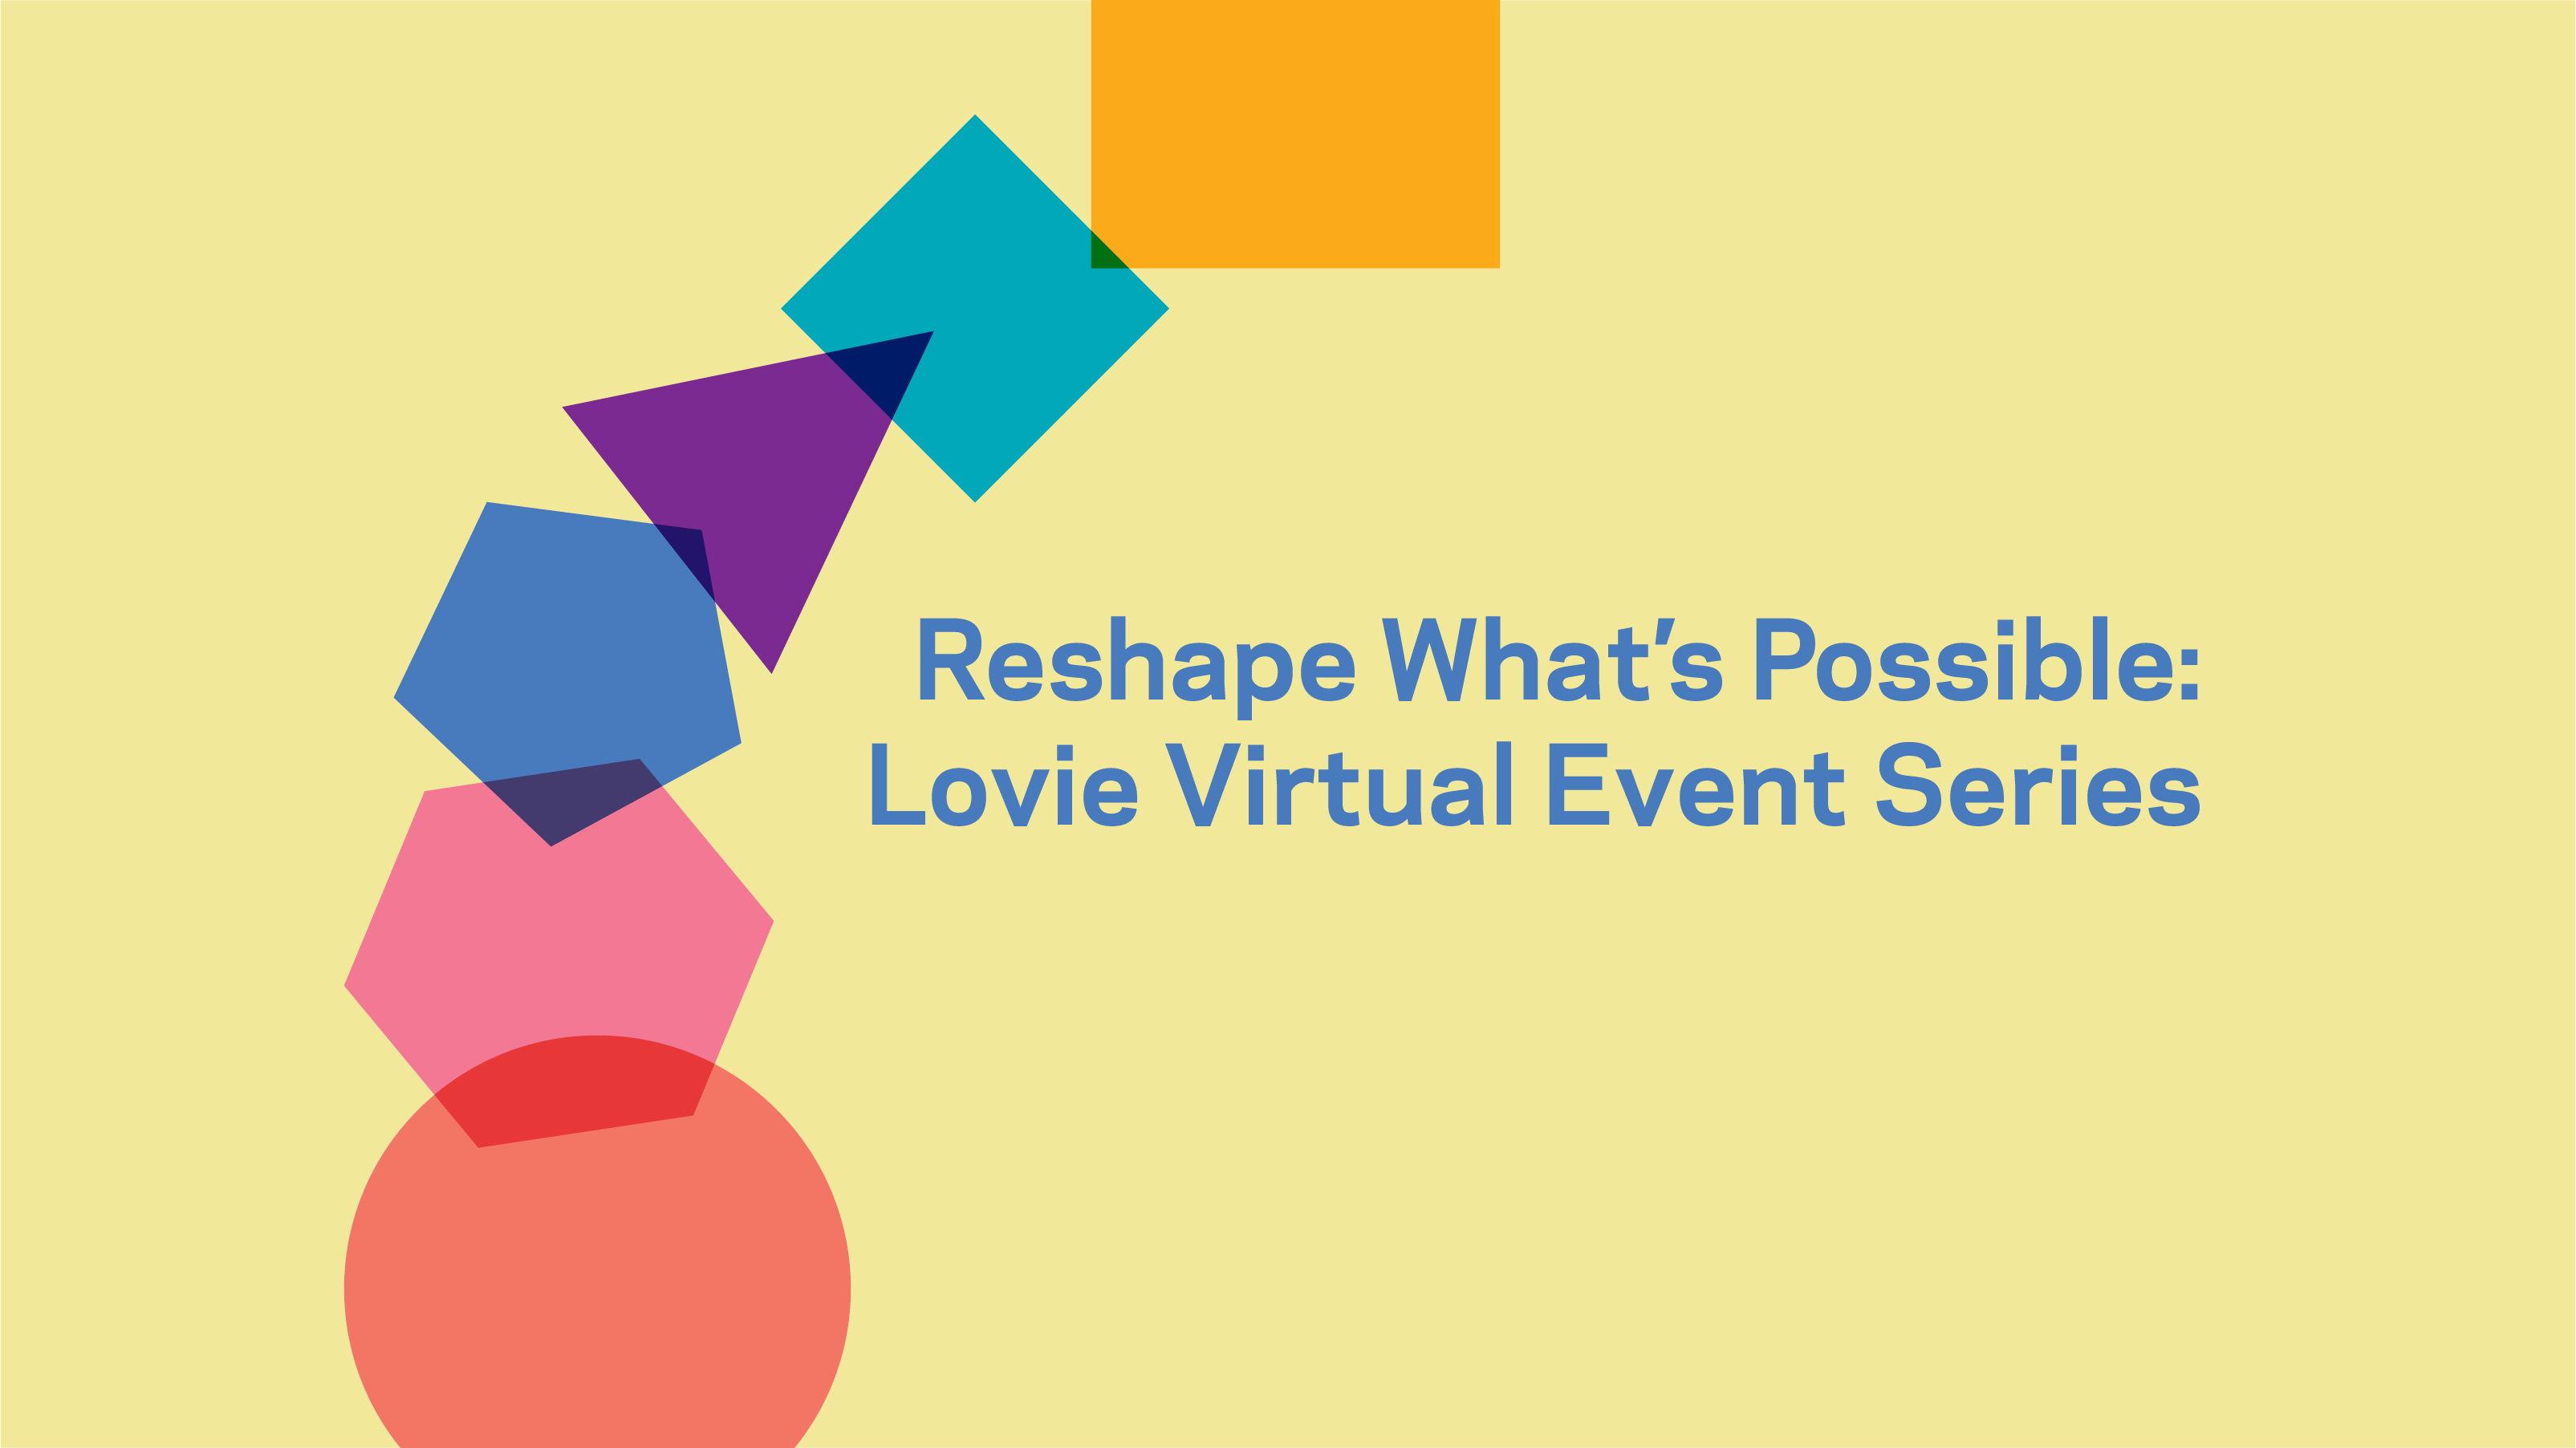 Reshape What’s Possible: Virtual Events